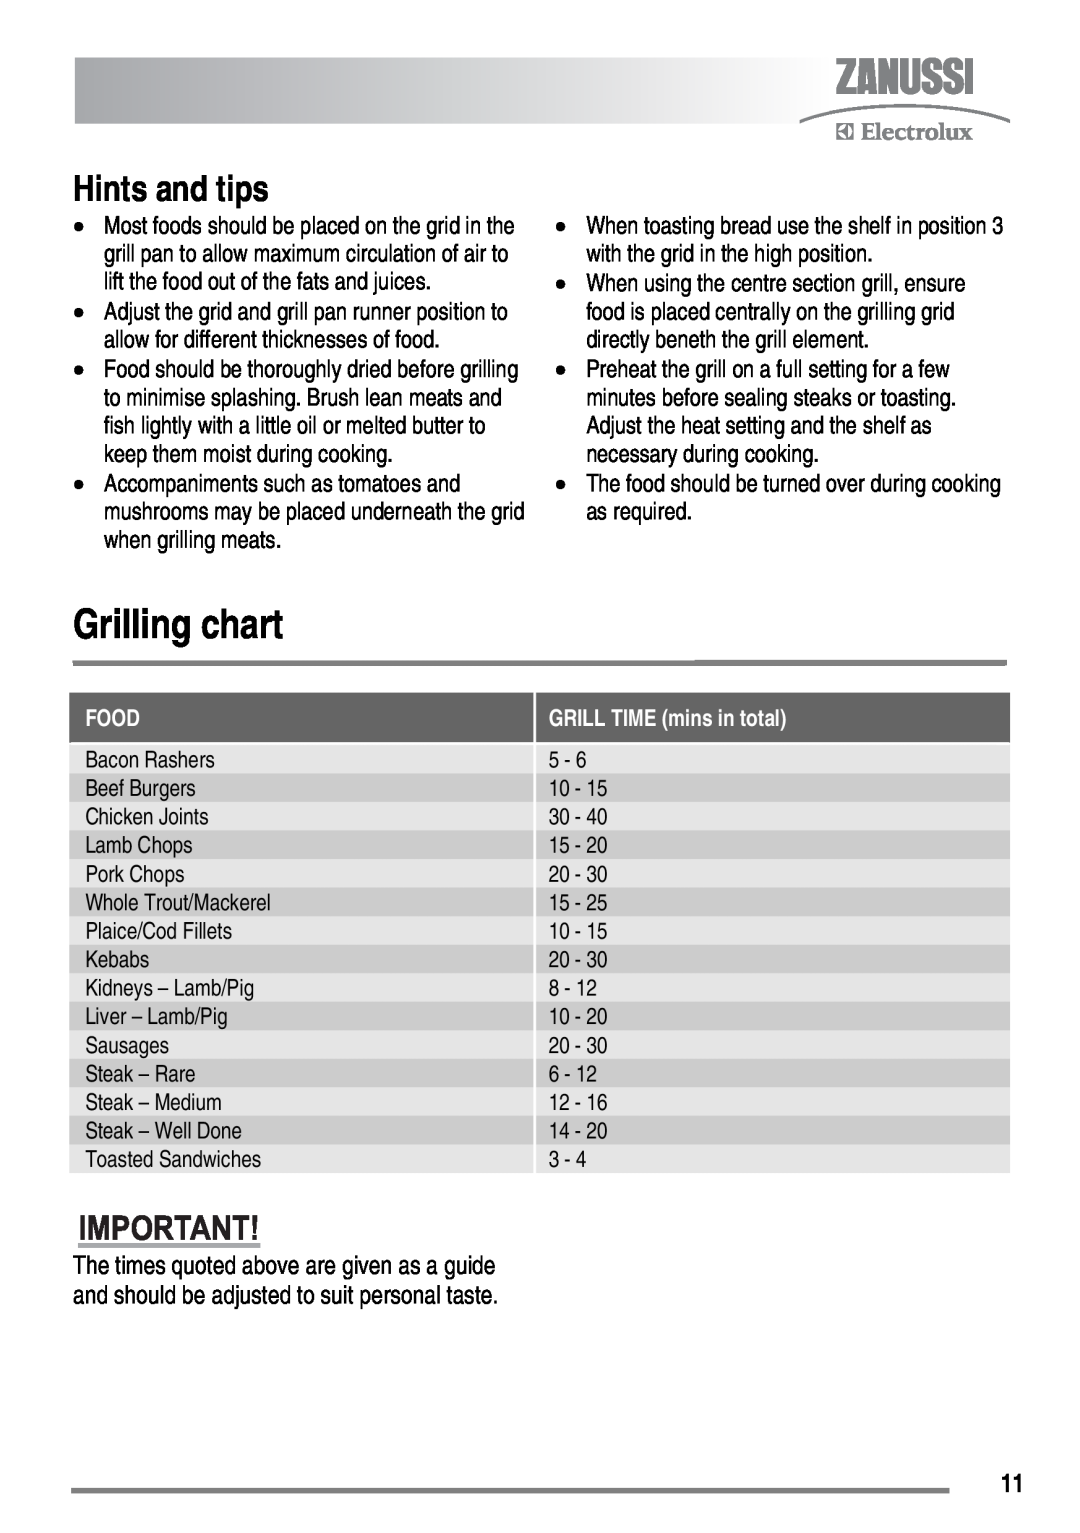 Zanussi ZKC6010 user manual Grilling chart, Hints and tips, Food, GRILL TIME mins in total 